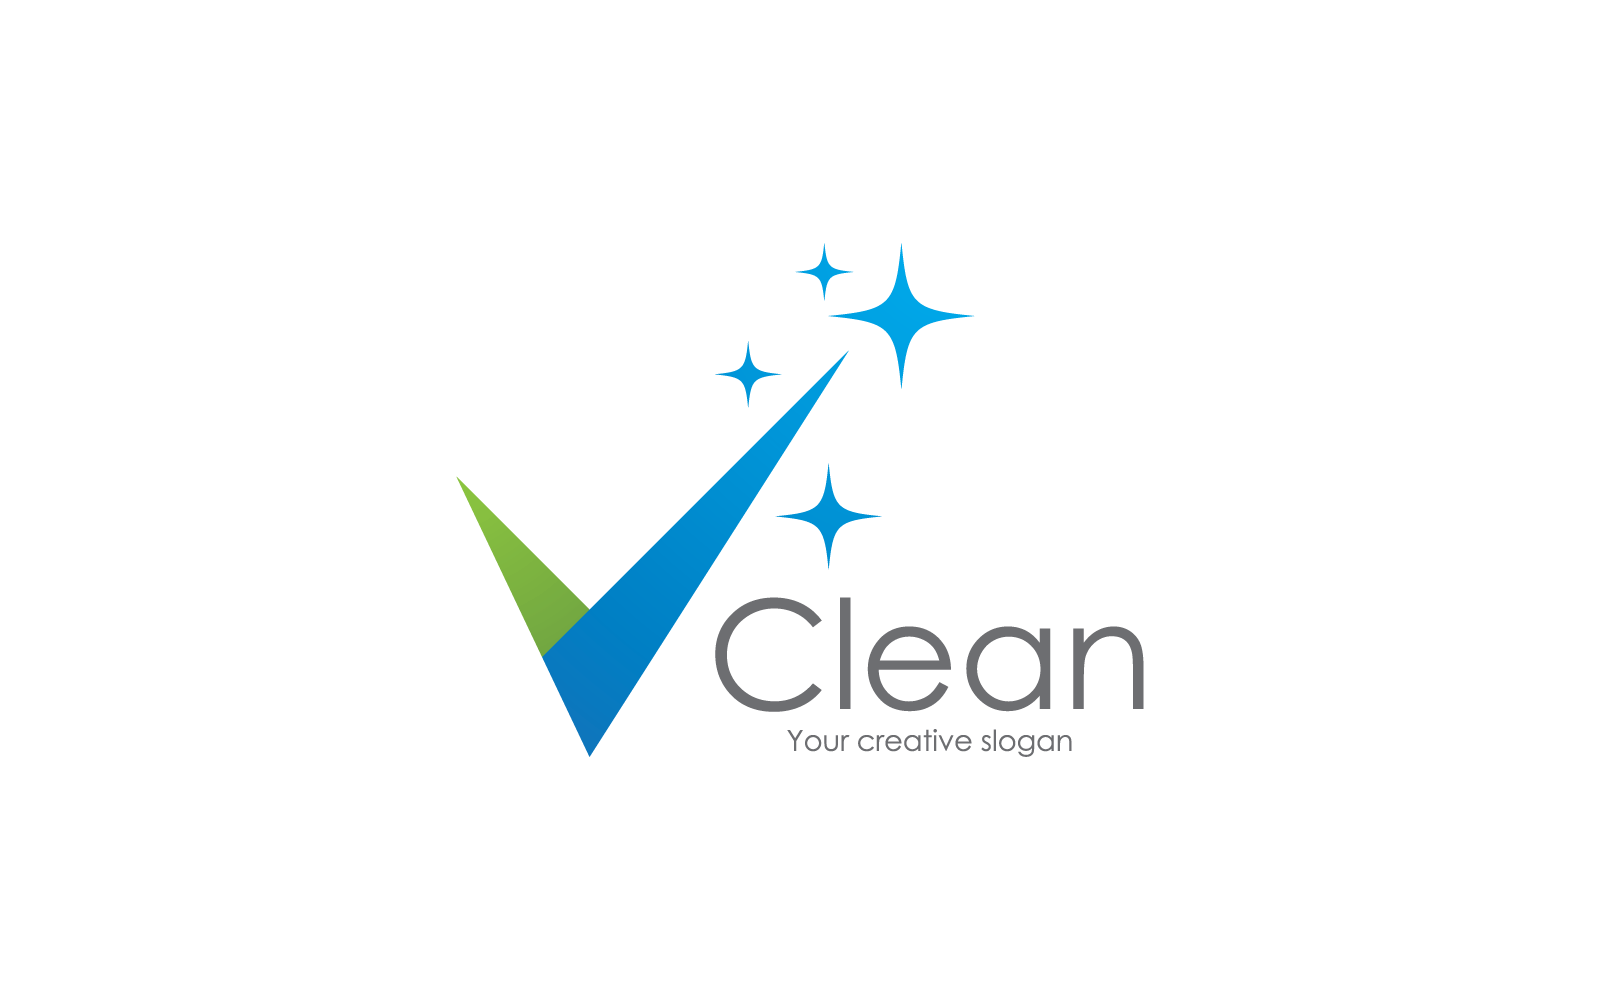 Cleaning logo and symbol illustration vector design template